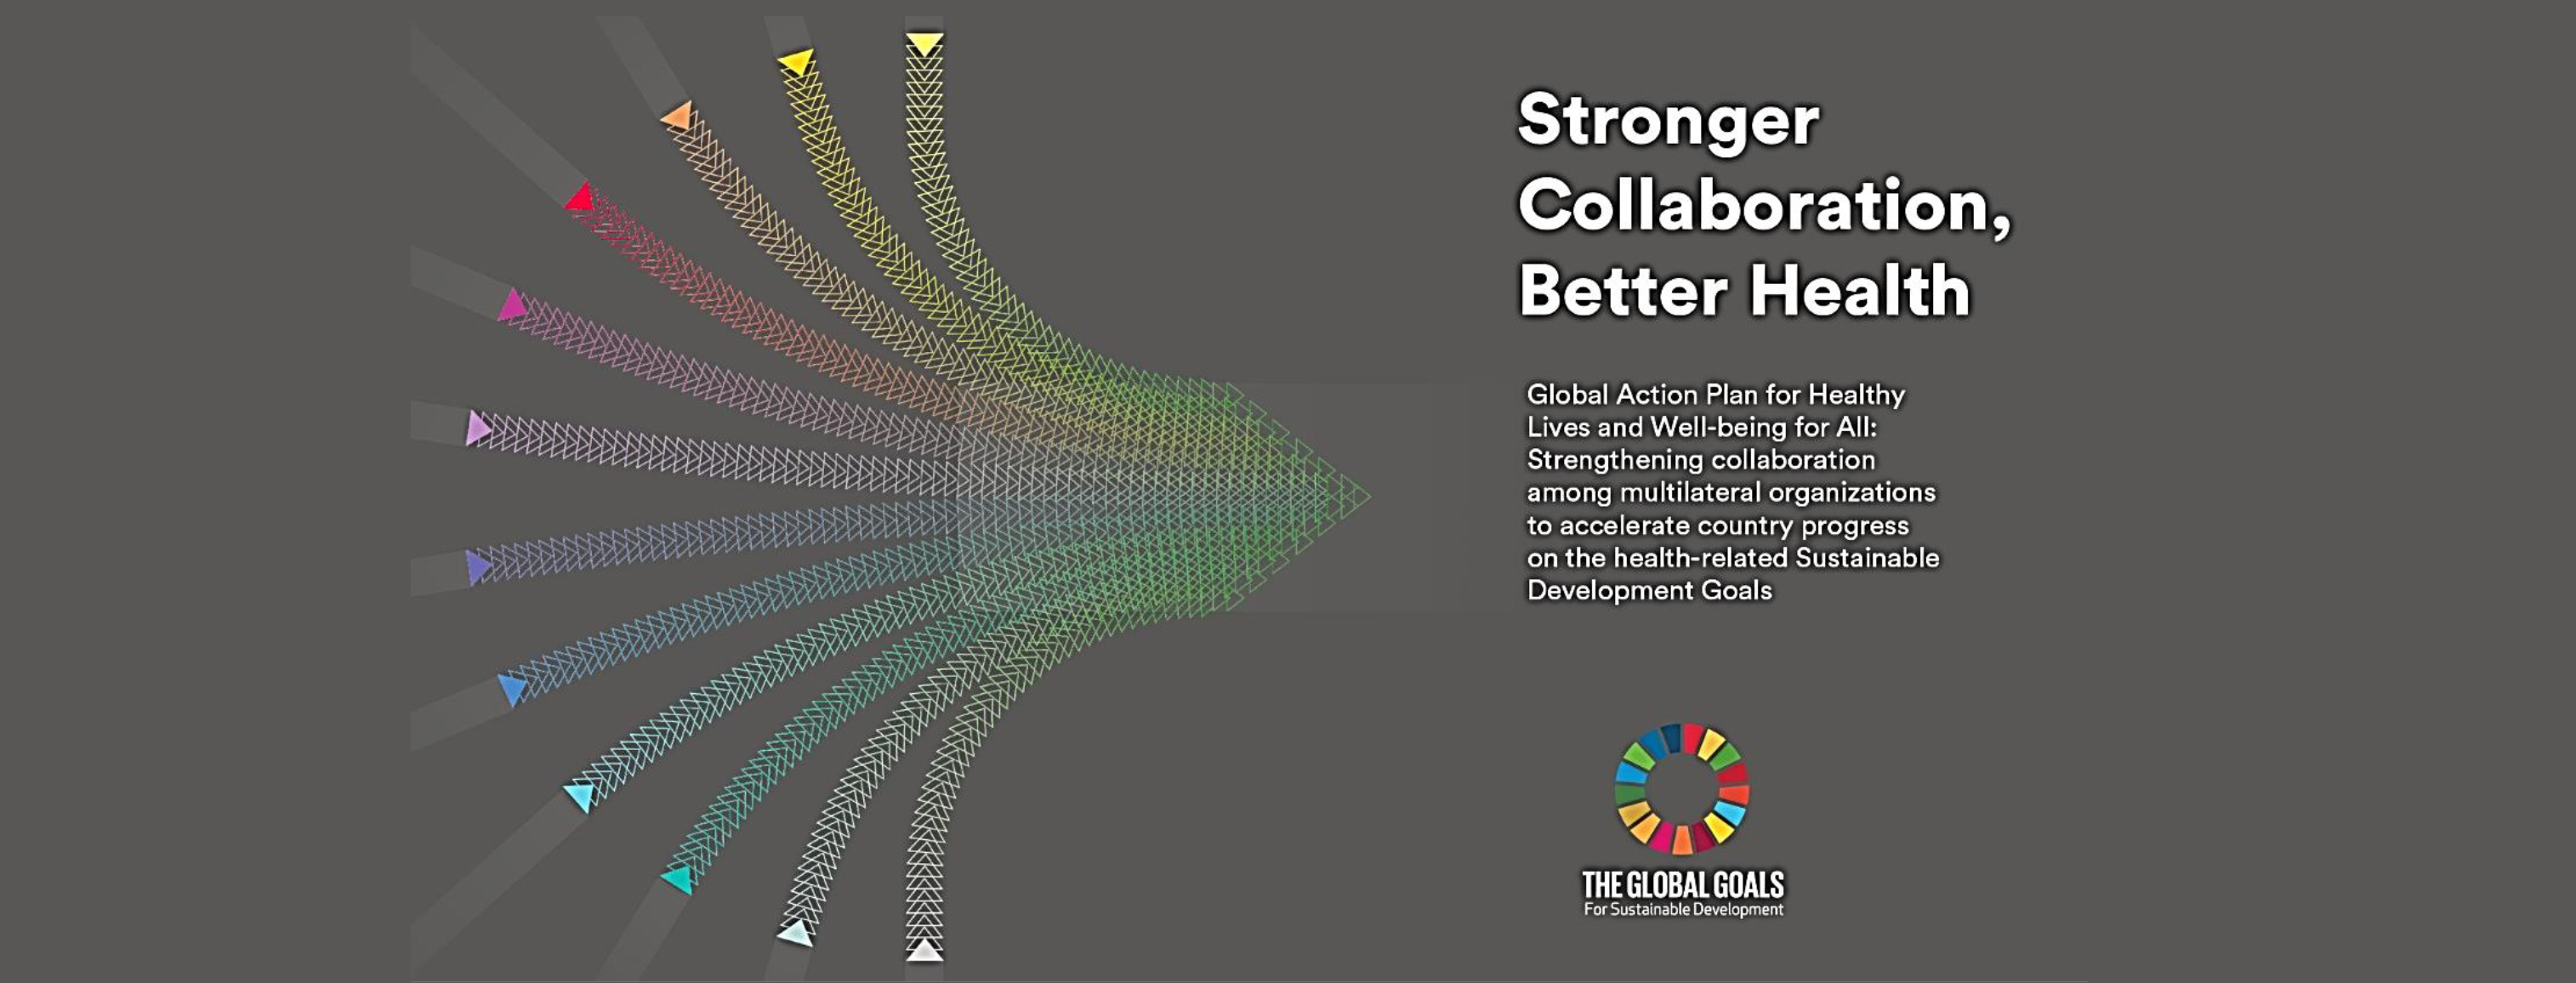 Stronger Collaboration, Better Health: Launch of the Global Action Plan